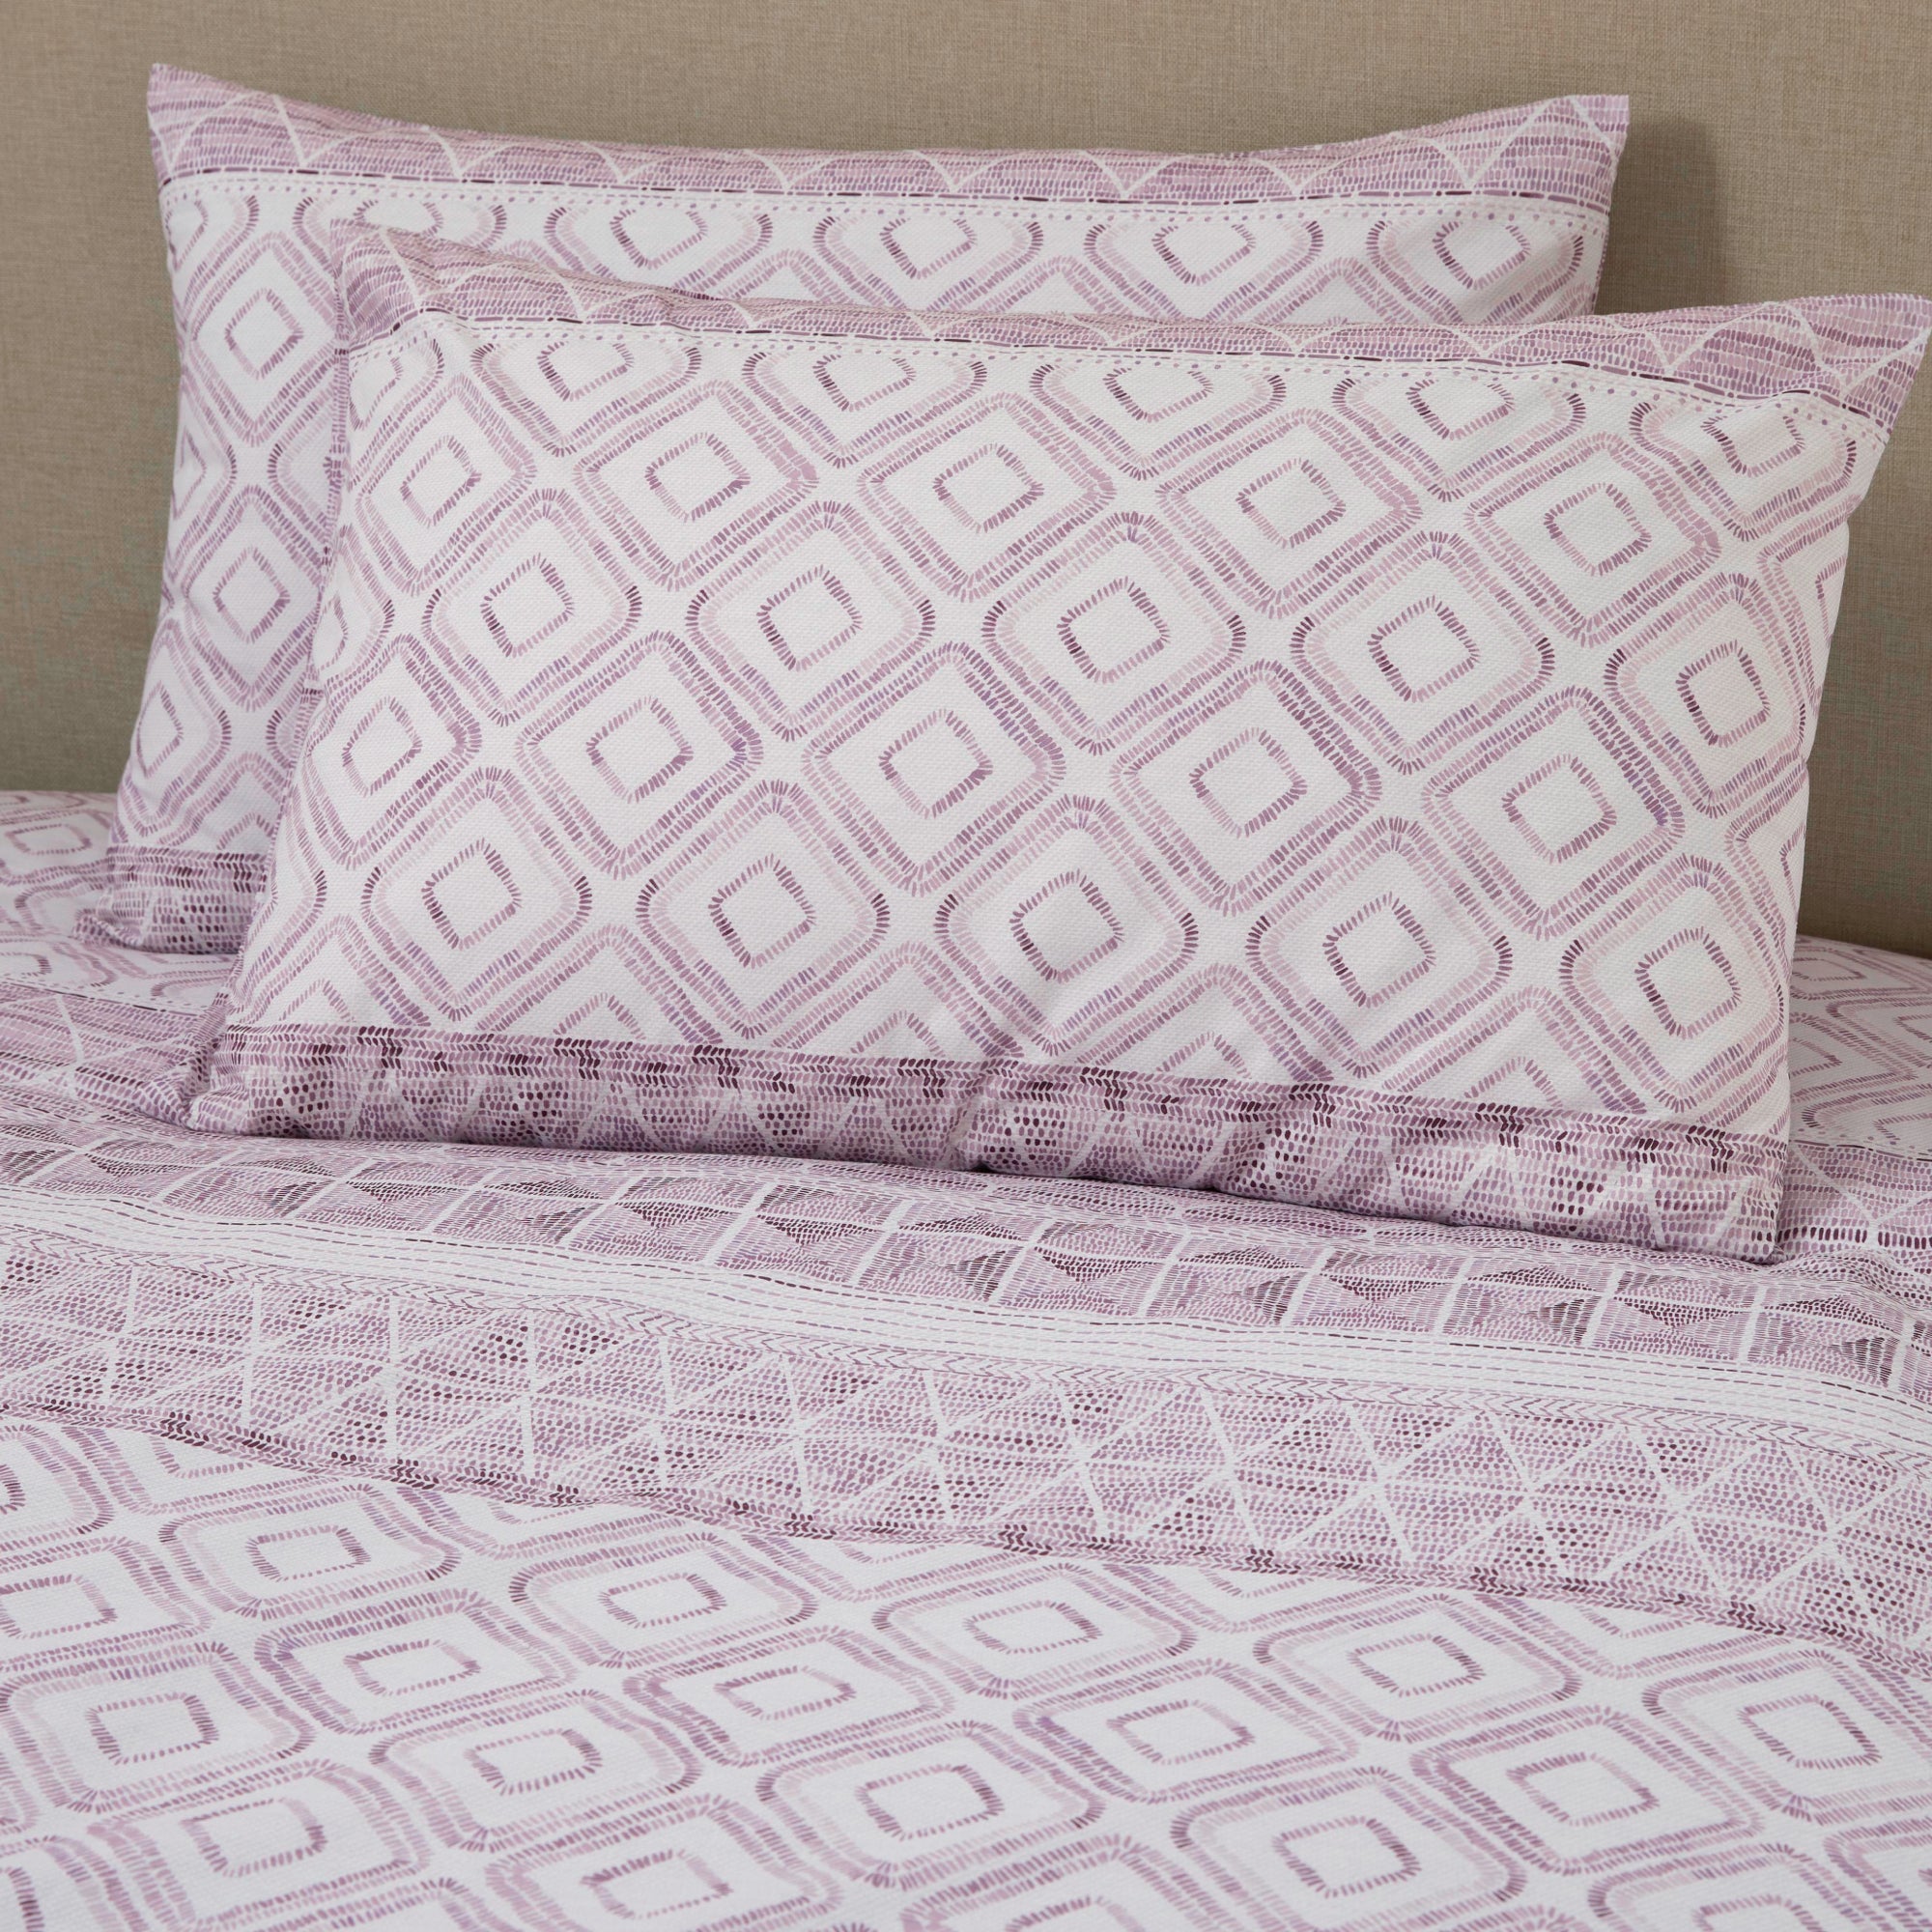 Duvet Cover Set Aden by Dreams And Drapes Design in Plum